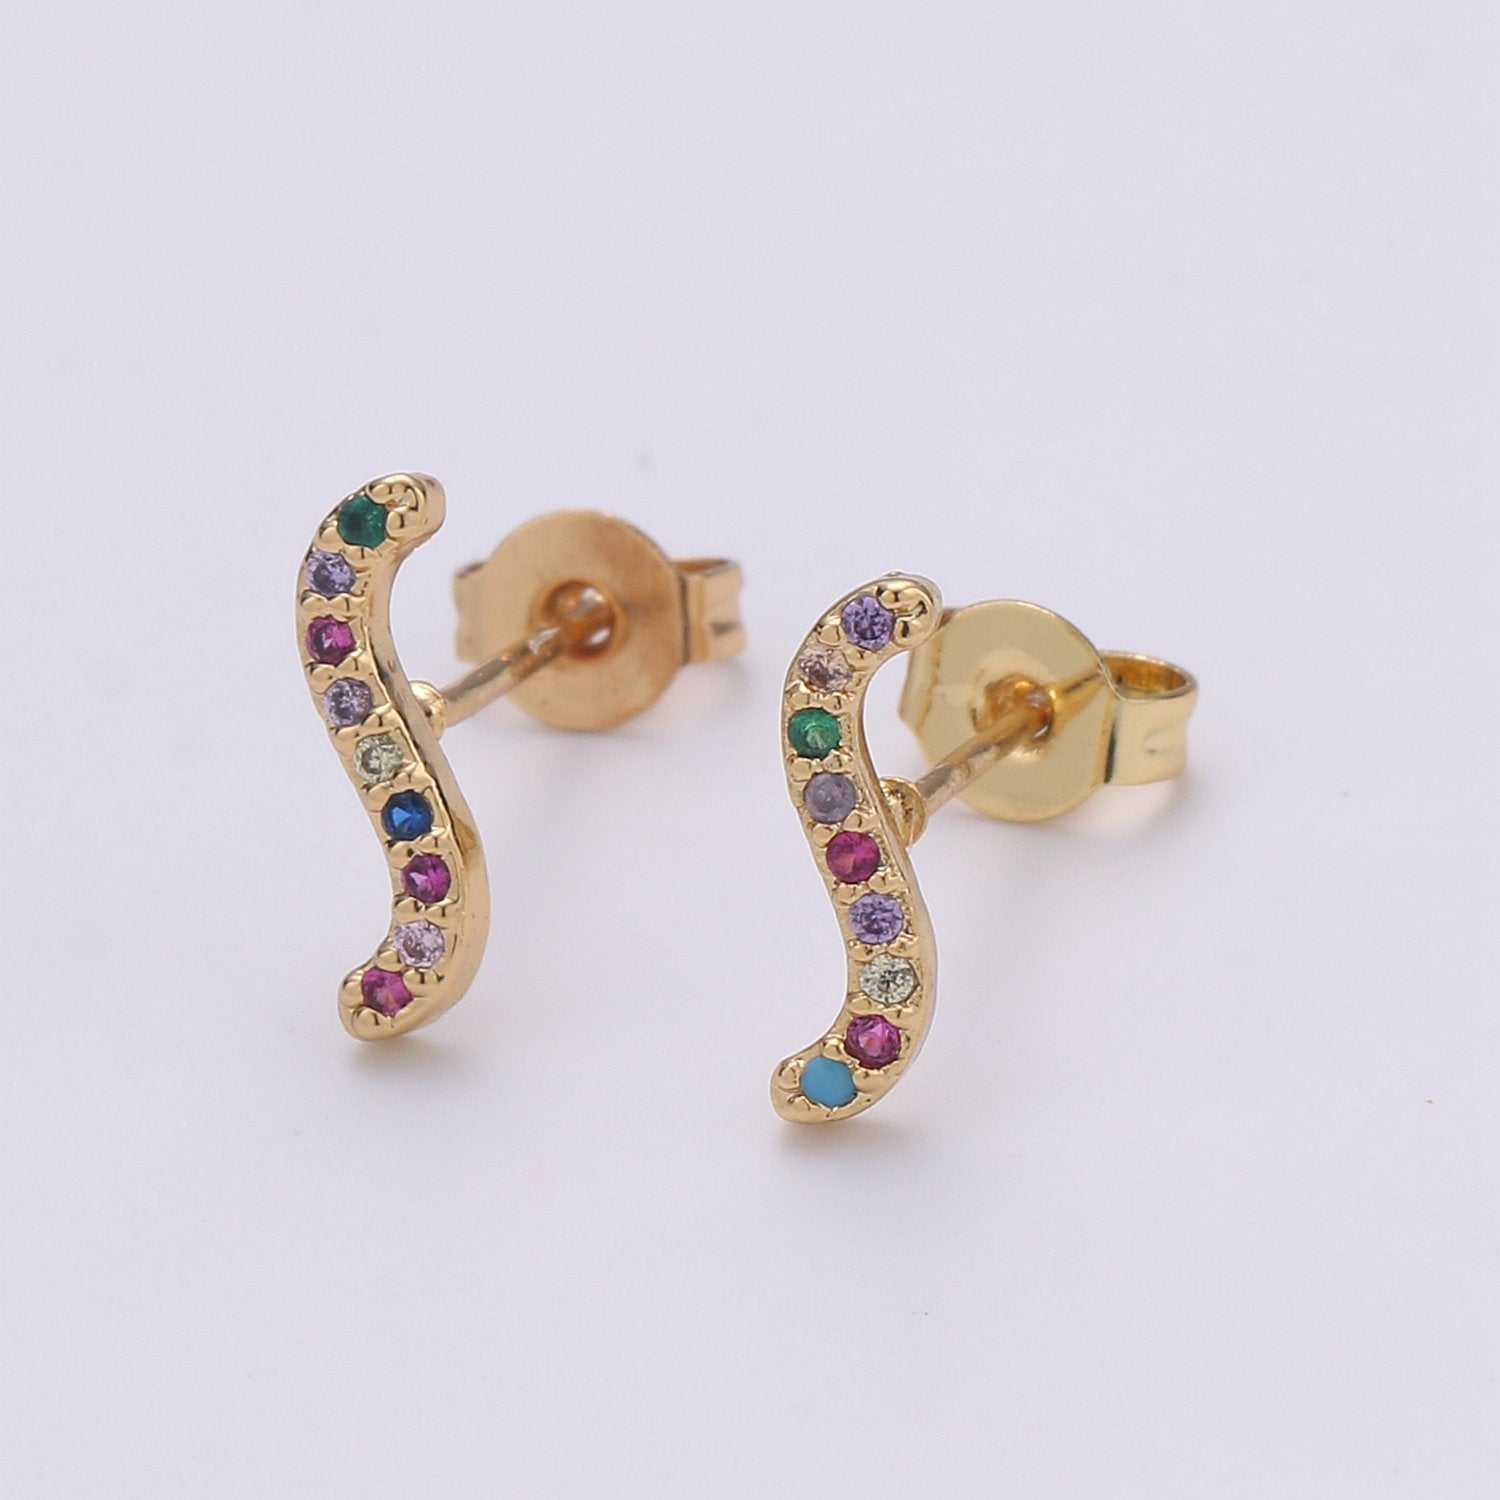 Rainbow Tiny CZ Wave Stud Earrings Dainty Multi Color S Curve Stud Earring Gold Minimalist Jewelry Gift For her christmas gift - DLUXCA